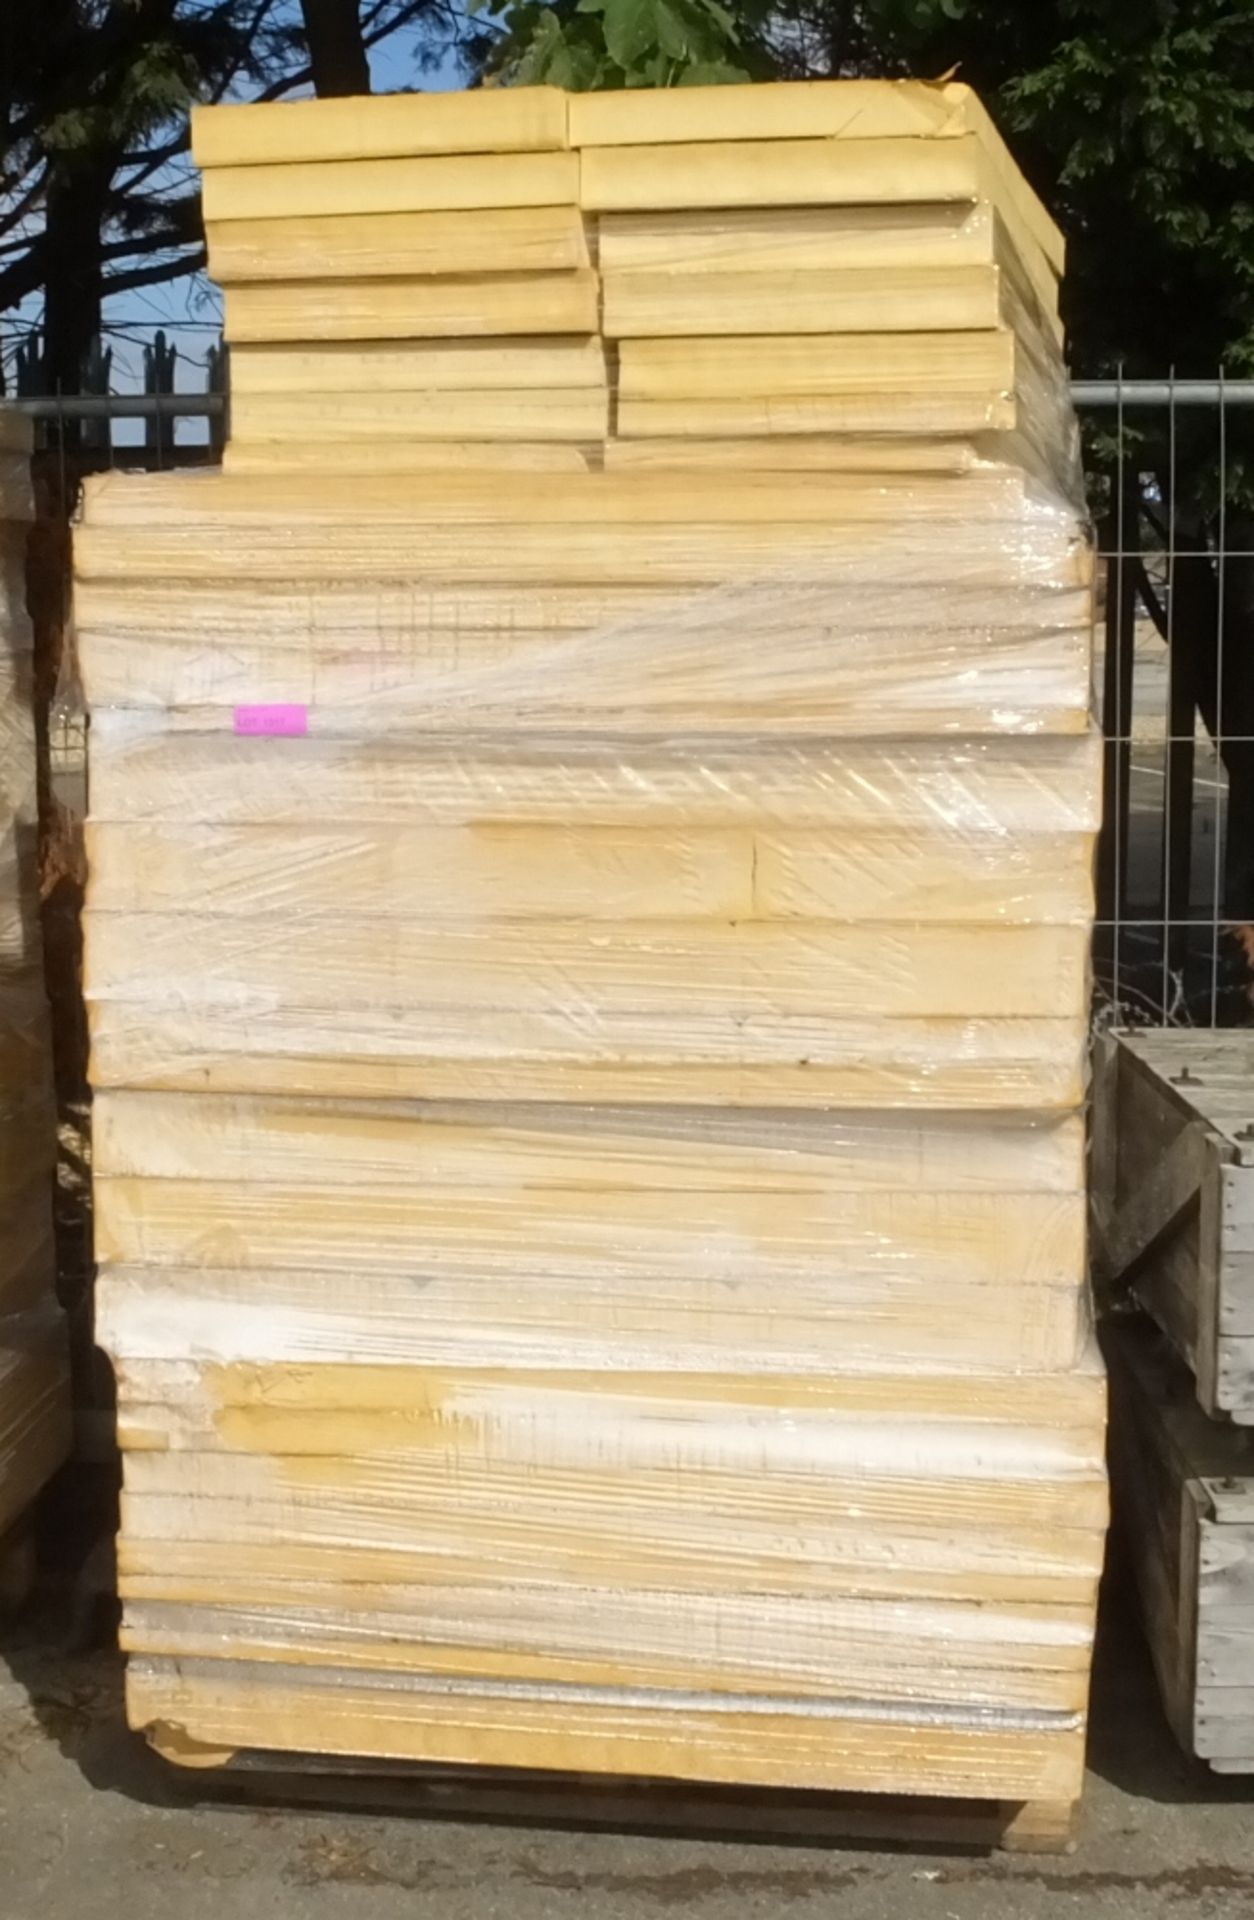 Pallet of insulation sheets - 1200 x 1200 - 27 sheets